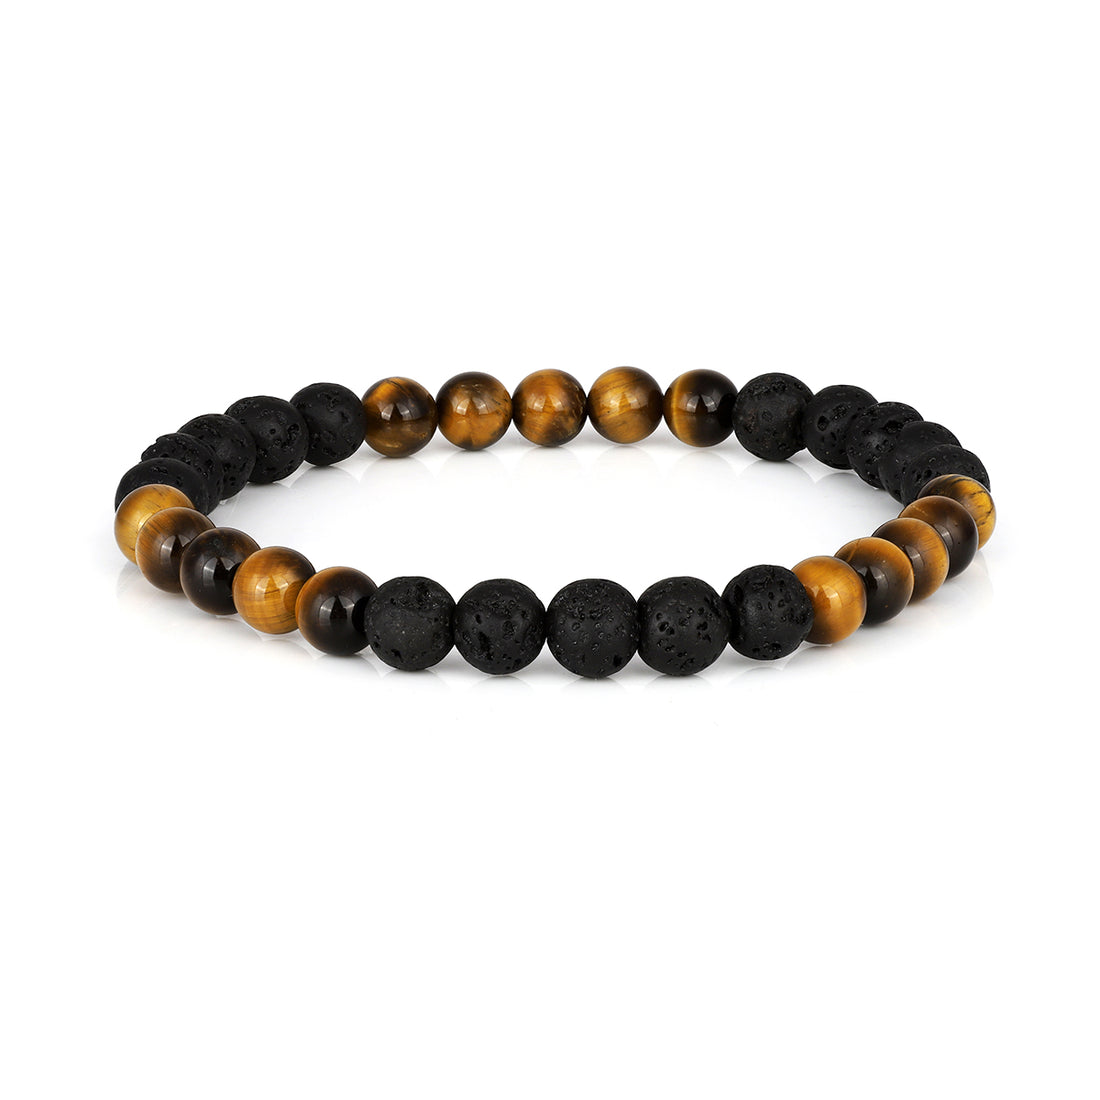 Lava and Brown Tiger's Eye Beads Stretch Bracelet